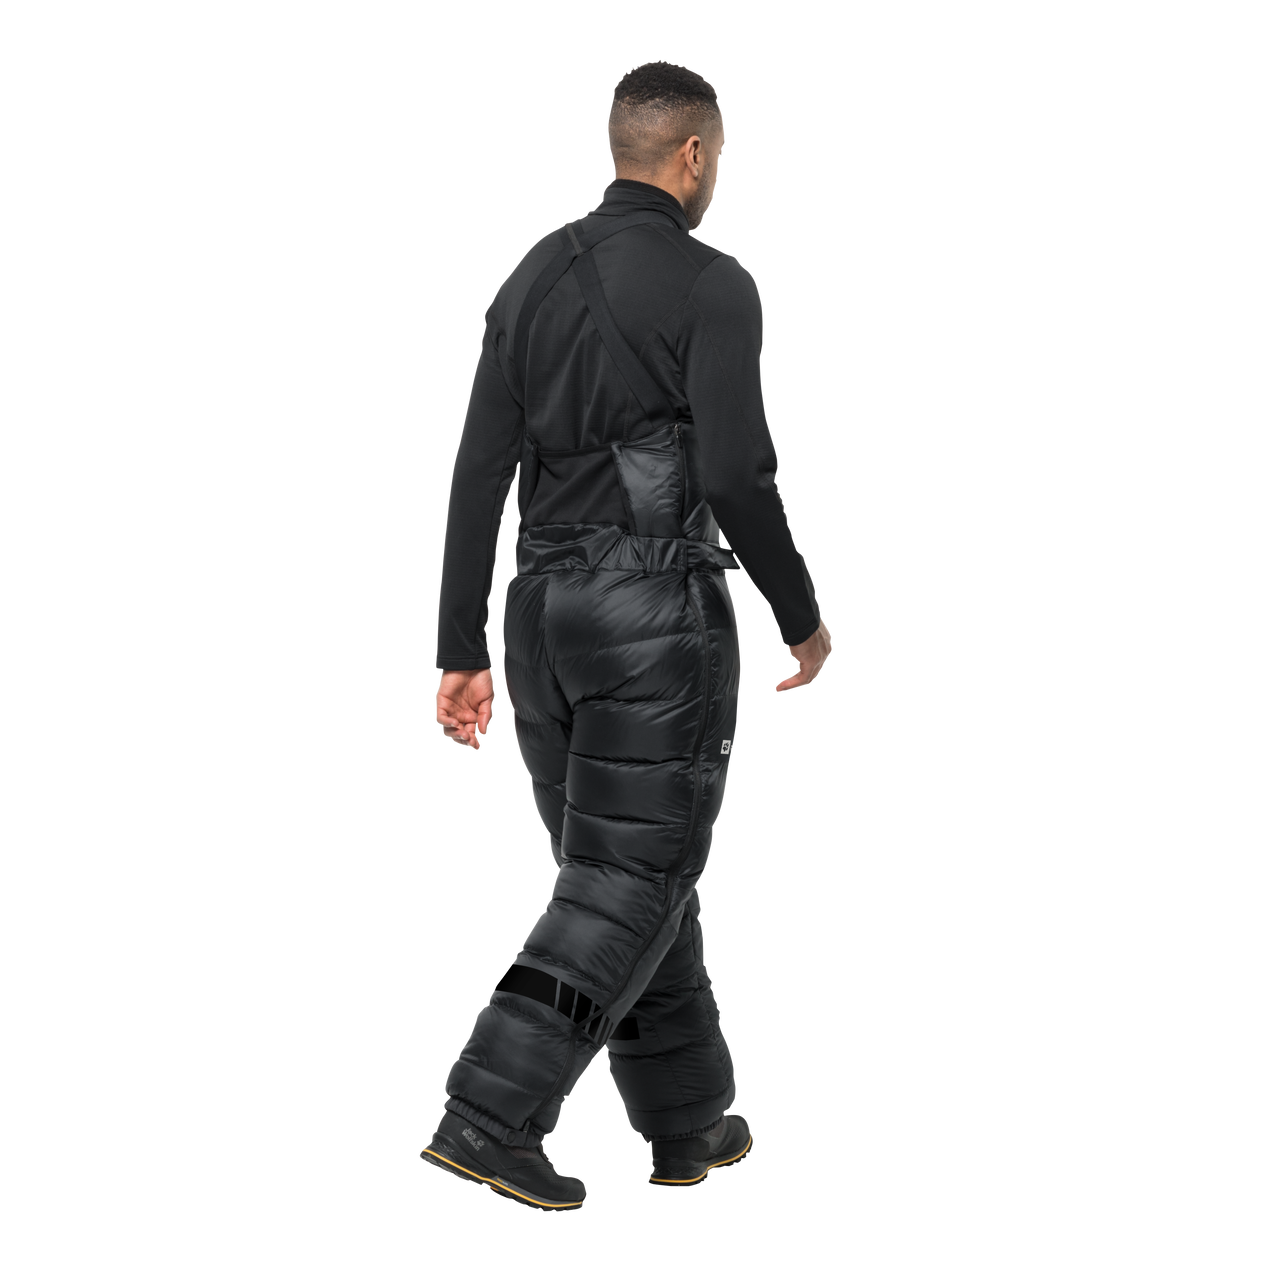 Black Padded Trousers